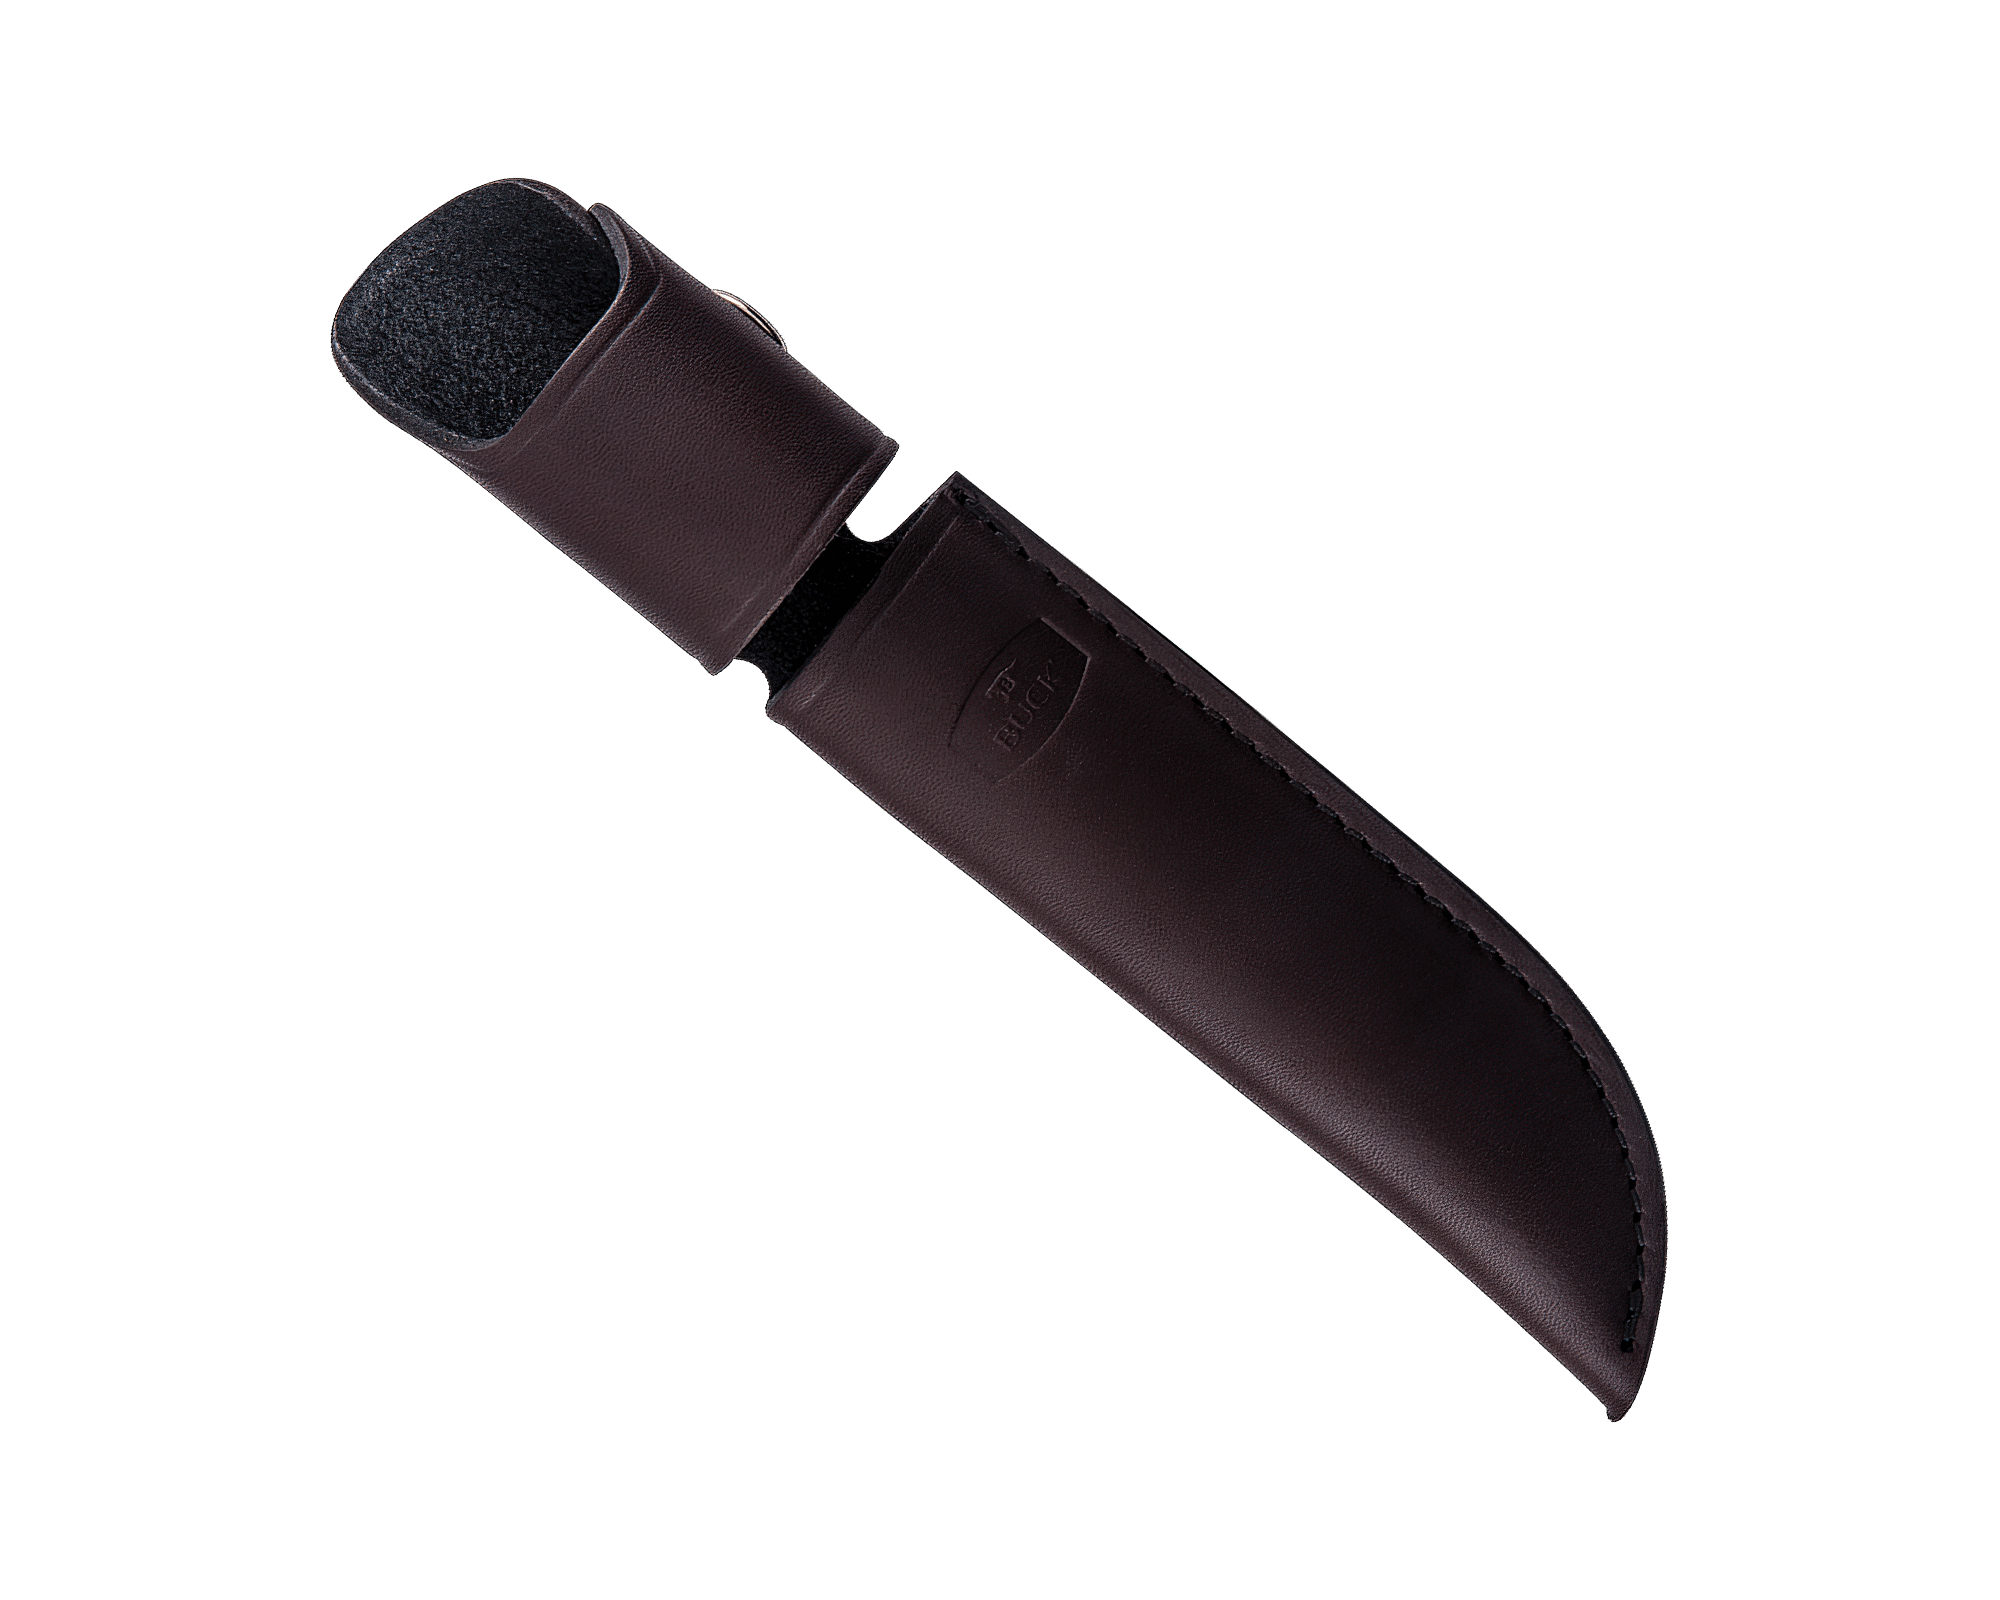 Sheath - 119 Special Left-handed